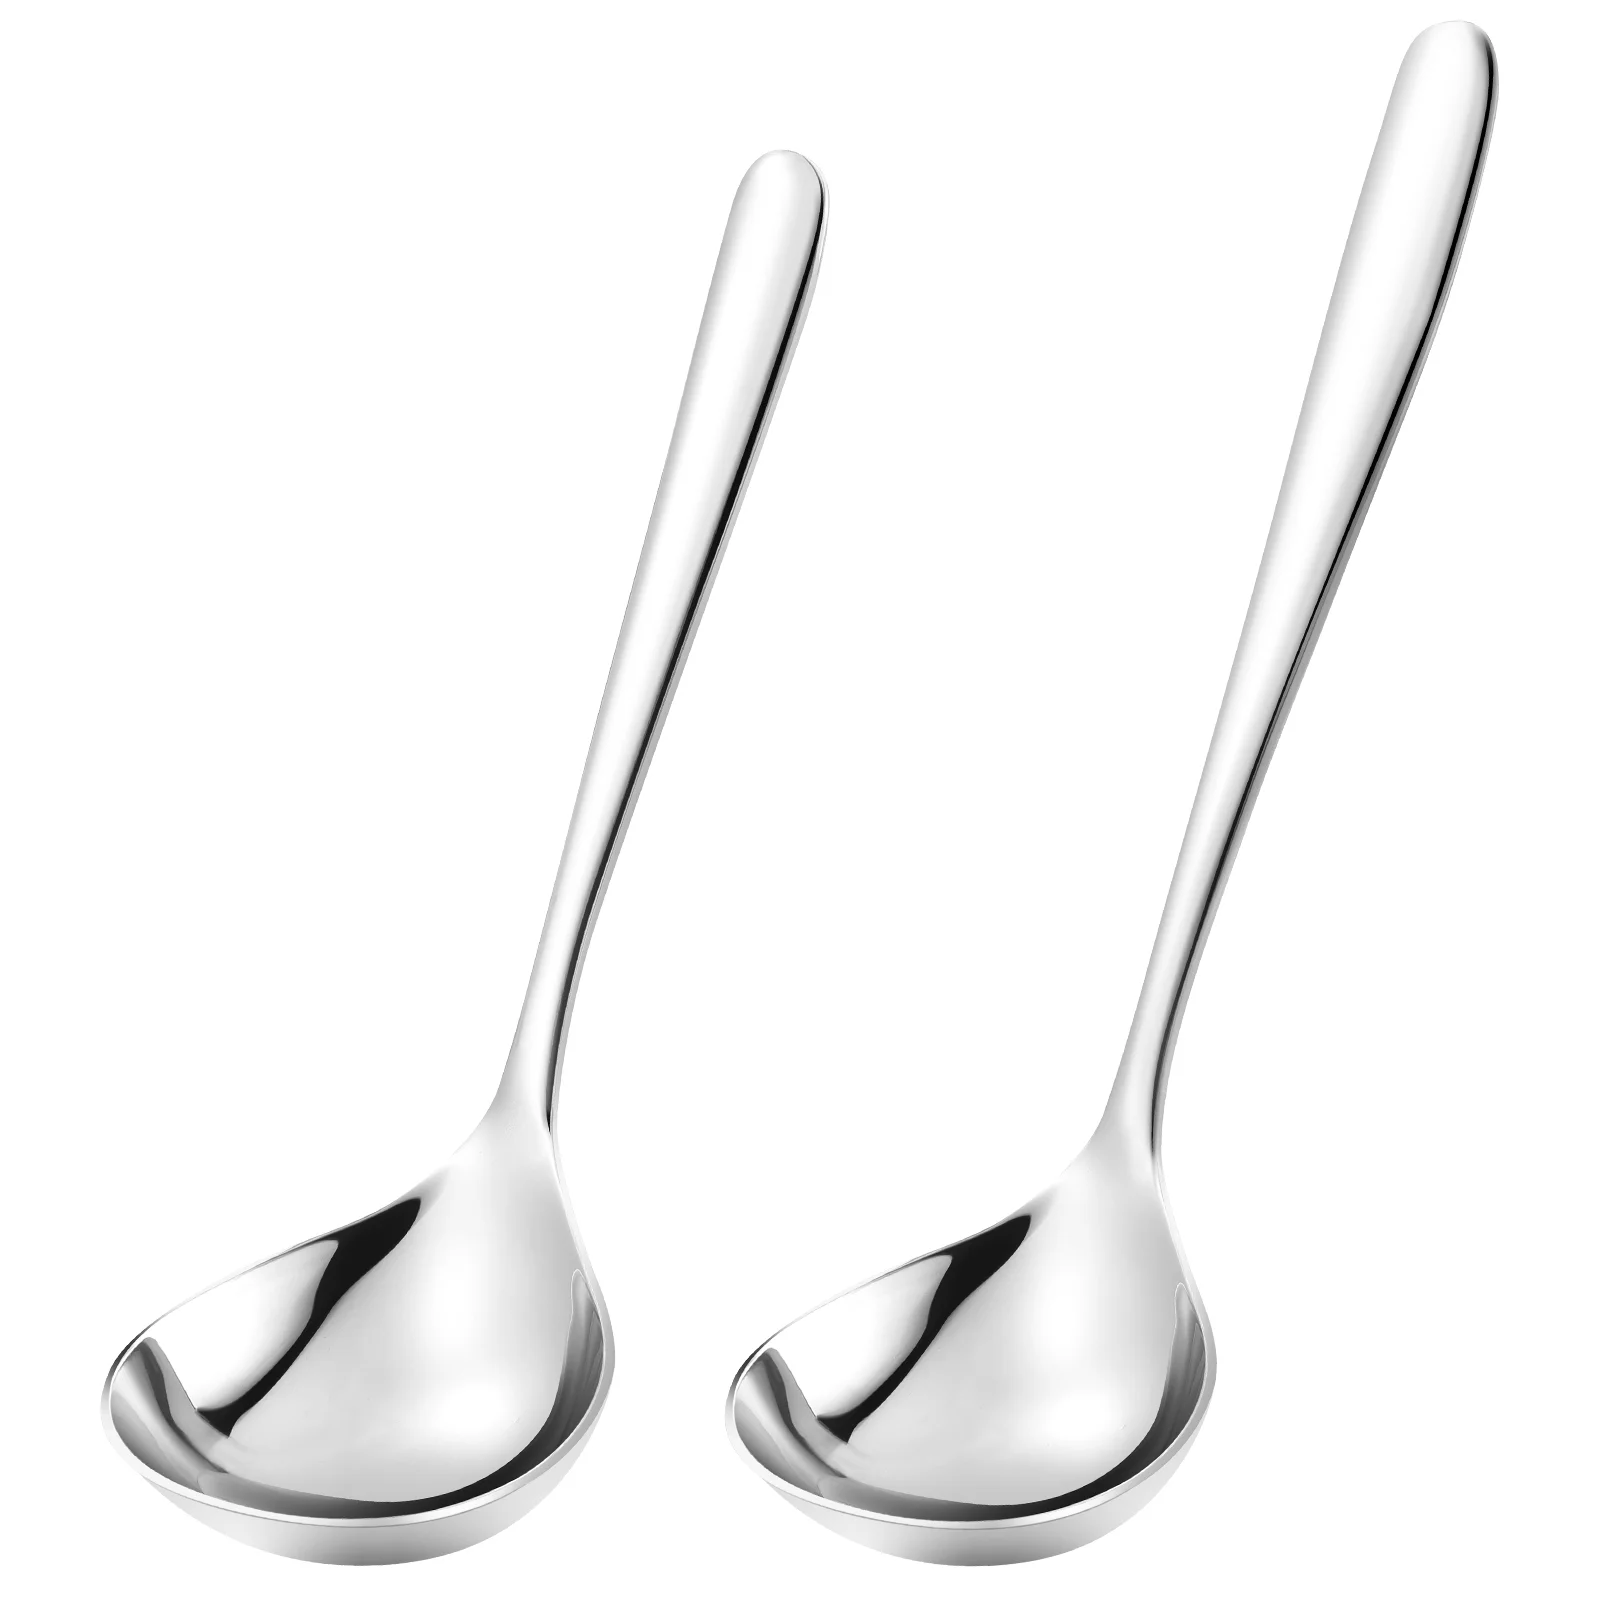 

2 Pcs Soup Spoons Asian Stainless Steel Western Food Serving Sauce Salad No-rust Ladle